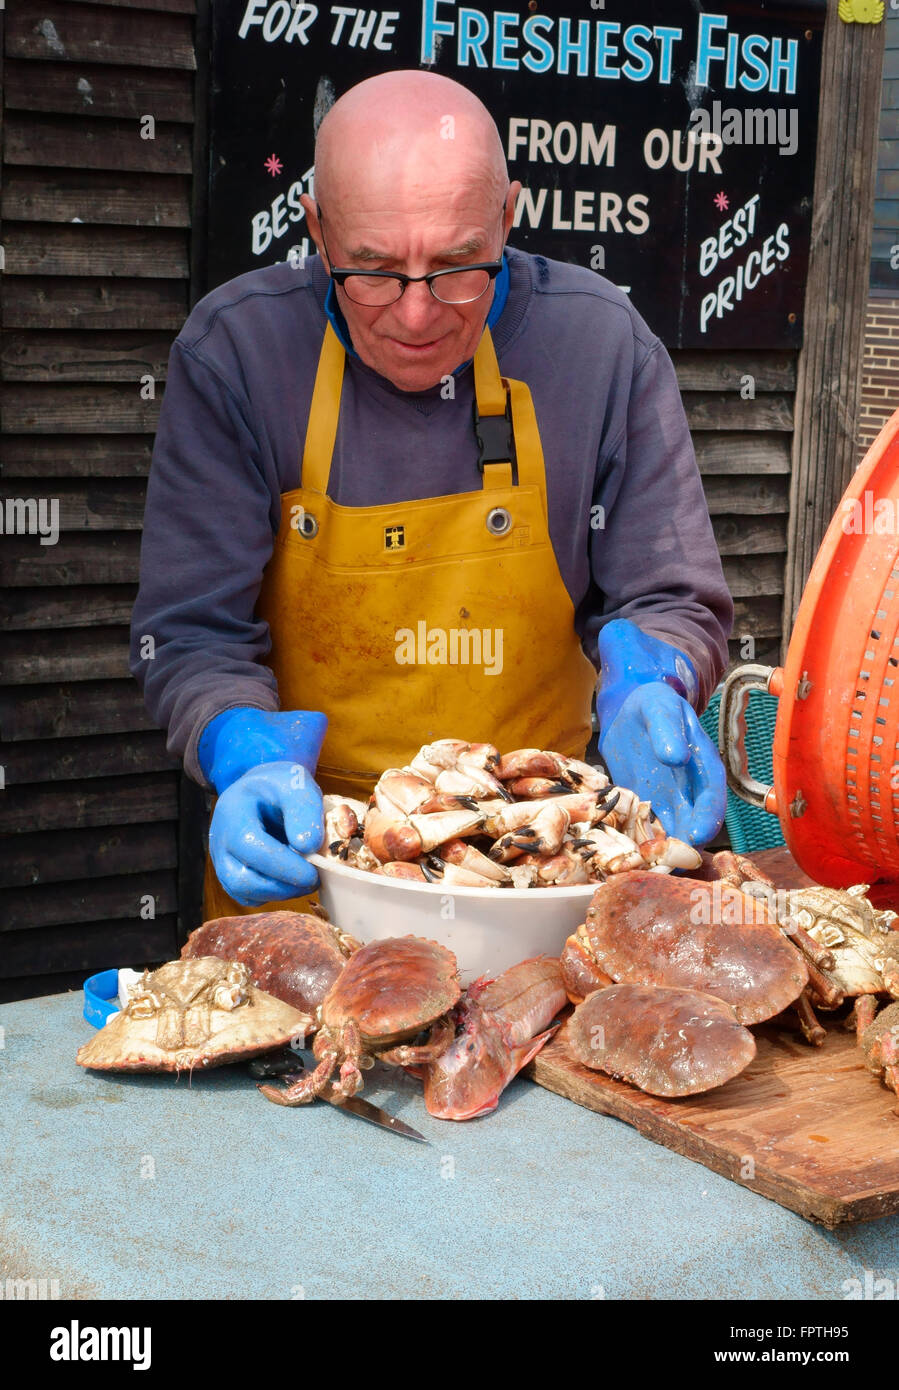 Hastings fisherman preparing crab claws on the stade beach, Hastings seafront, East Sussex, England, UK, GB Stock Photo